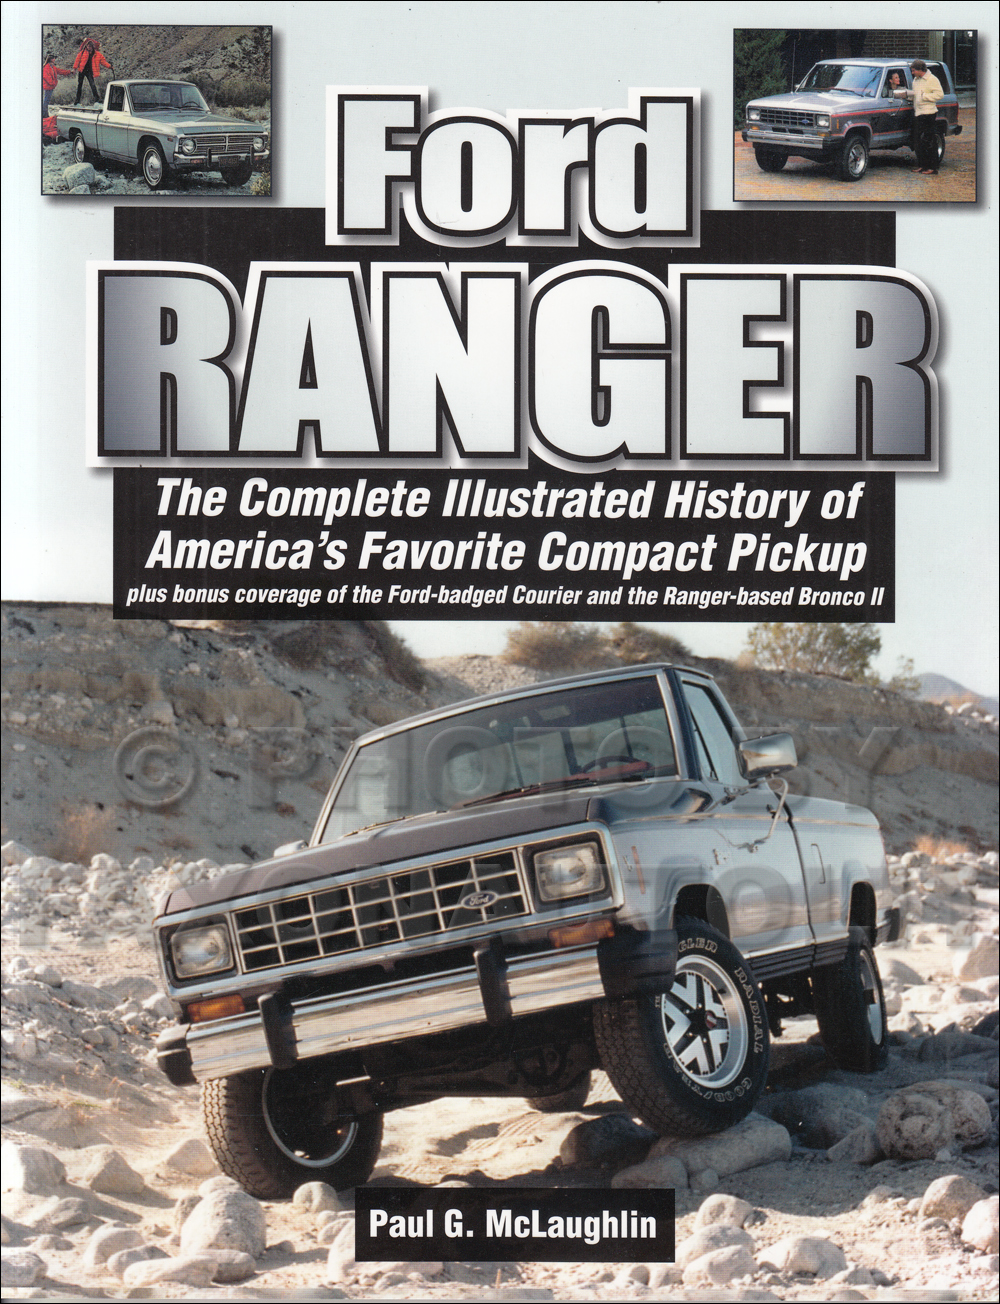 History of the Ford Ranger and Bronco II